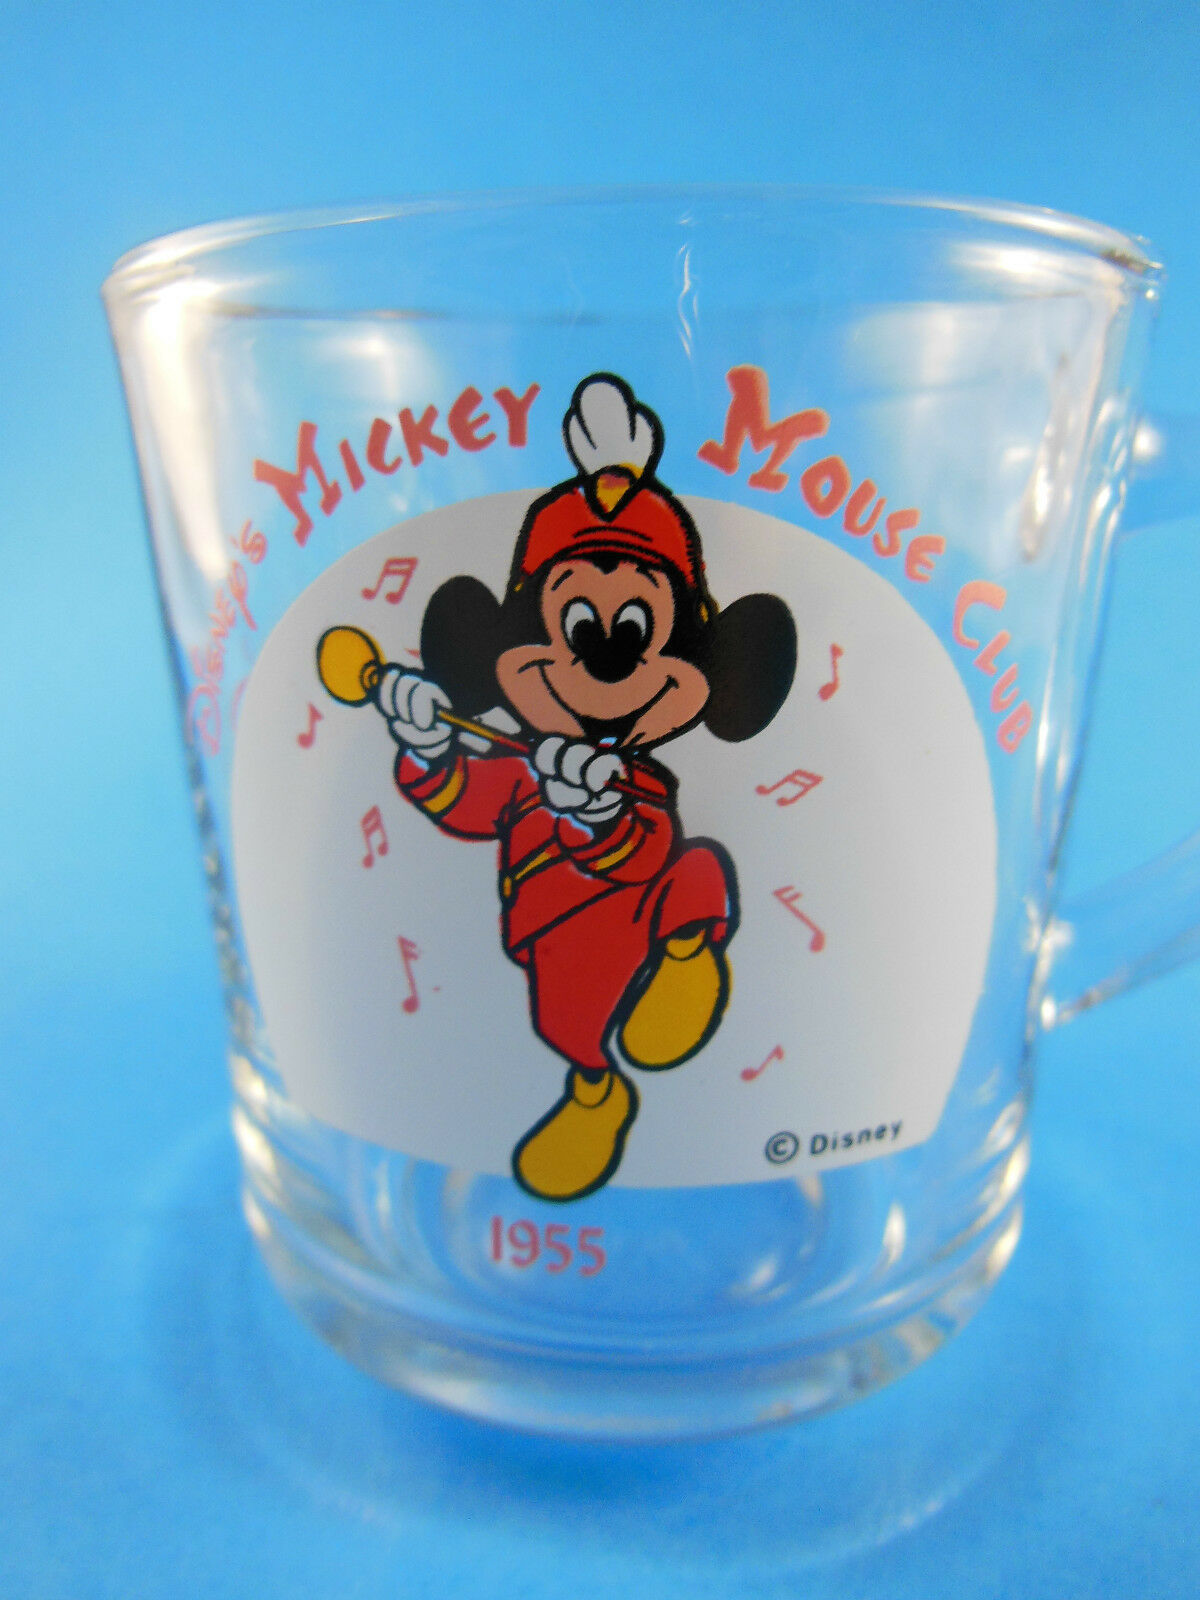 Disney Mickey Mouse 1955 with Mickey Marching Clear Glass Mug Cup USA Vintage - $7.42